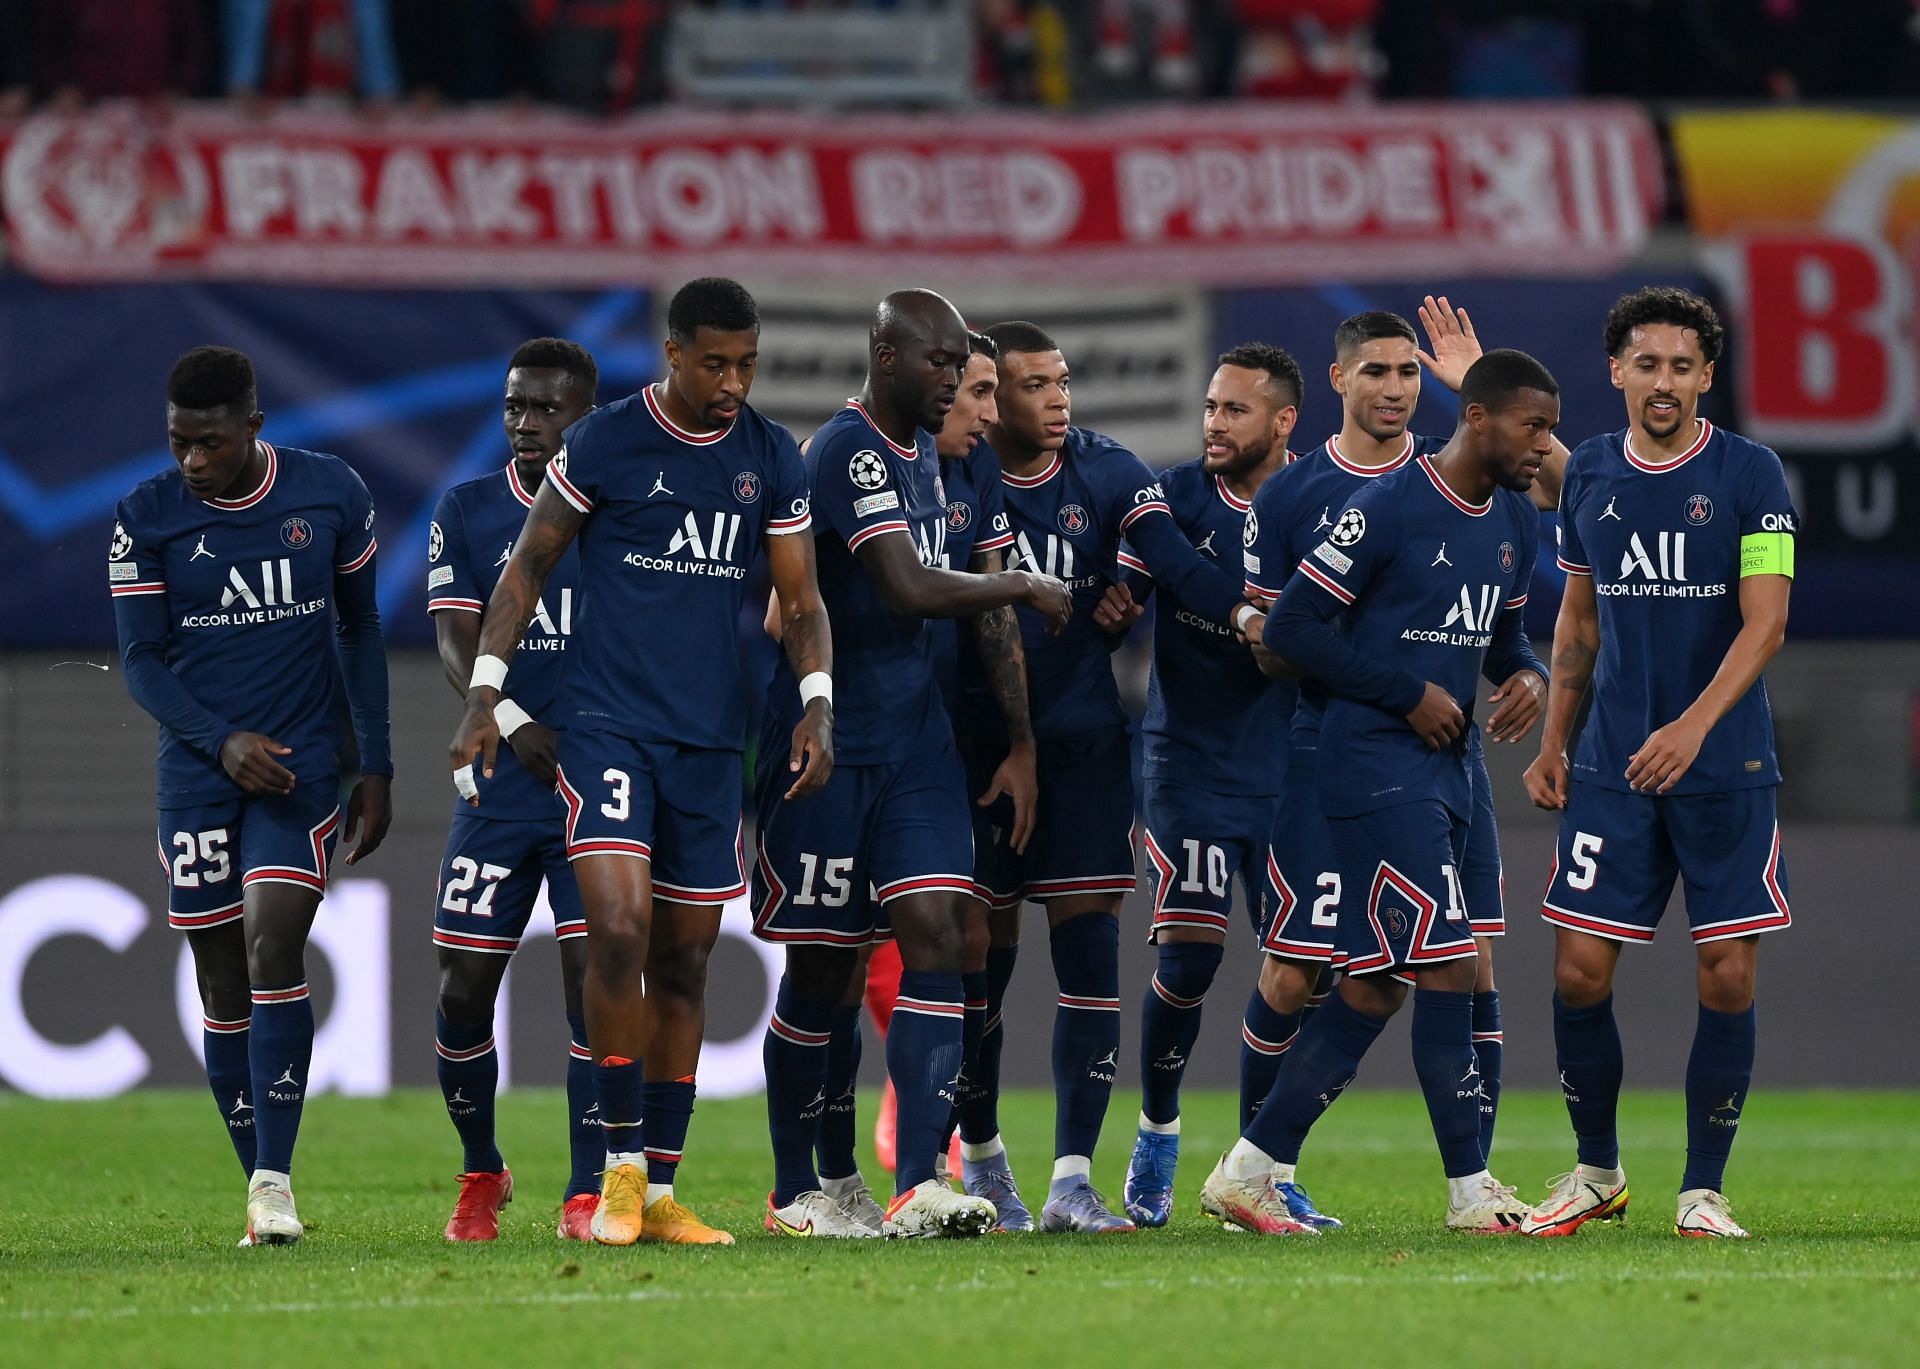 psg fans barred from attending match against saint etienne due to previous incidents of fan trouble reports